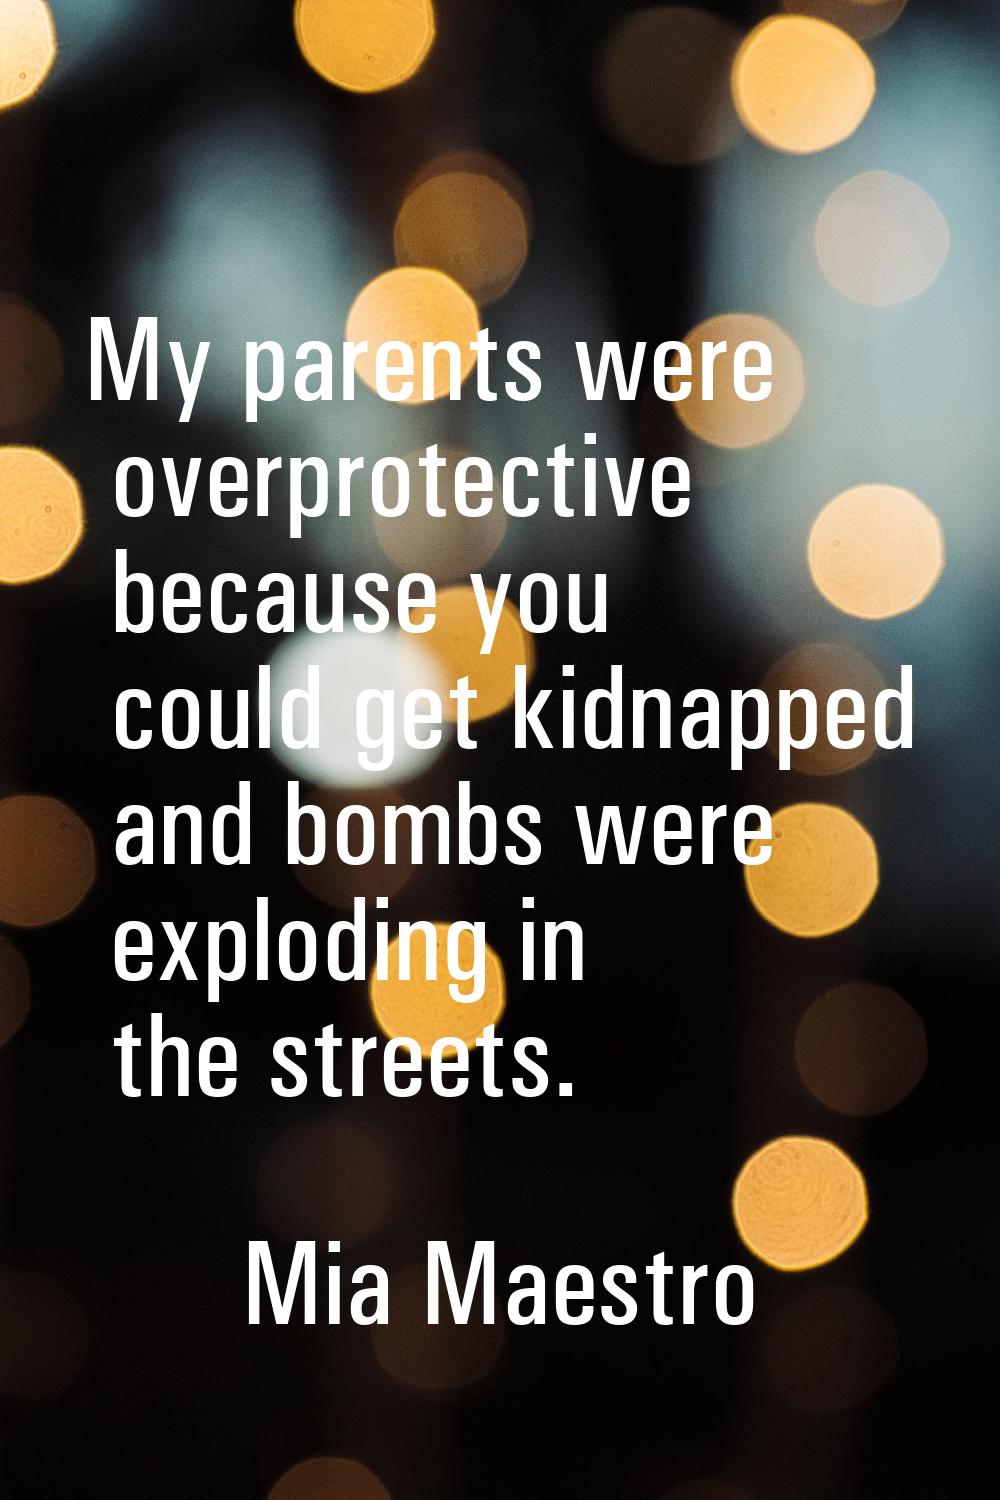 My parents were overprotective because you could get kidnapped and bombs were exploding in the stre